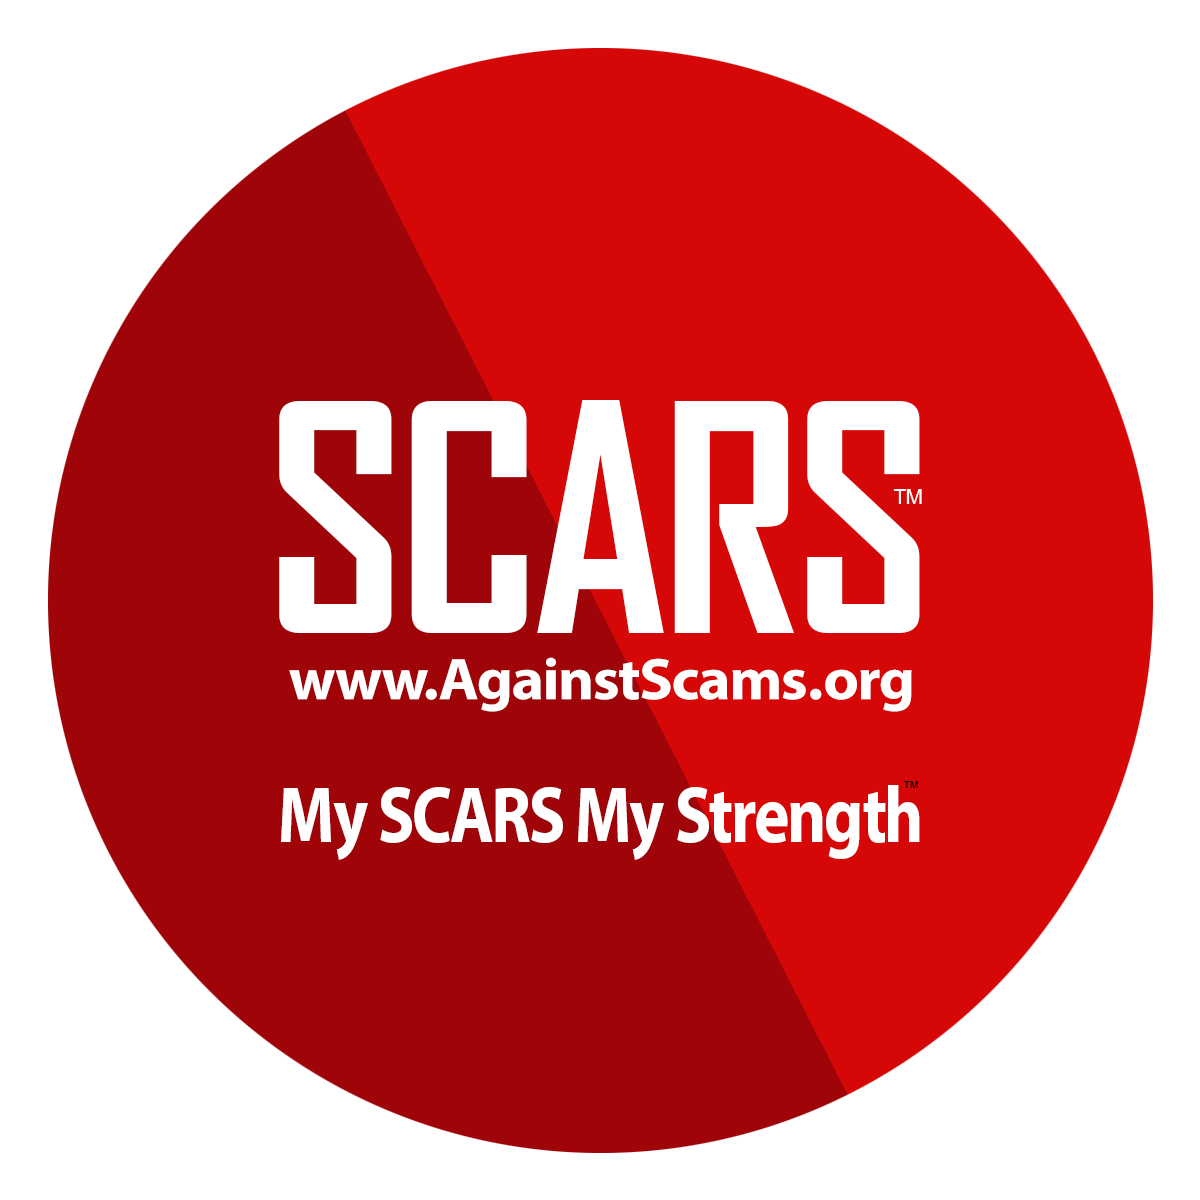 SCARS the Society of Citizens Against Relationship Scams Incorporated